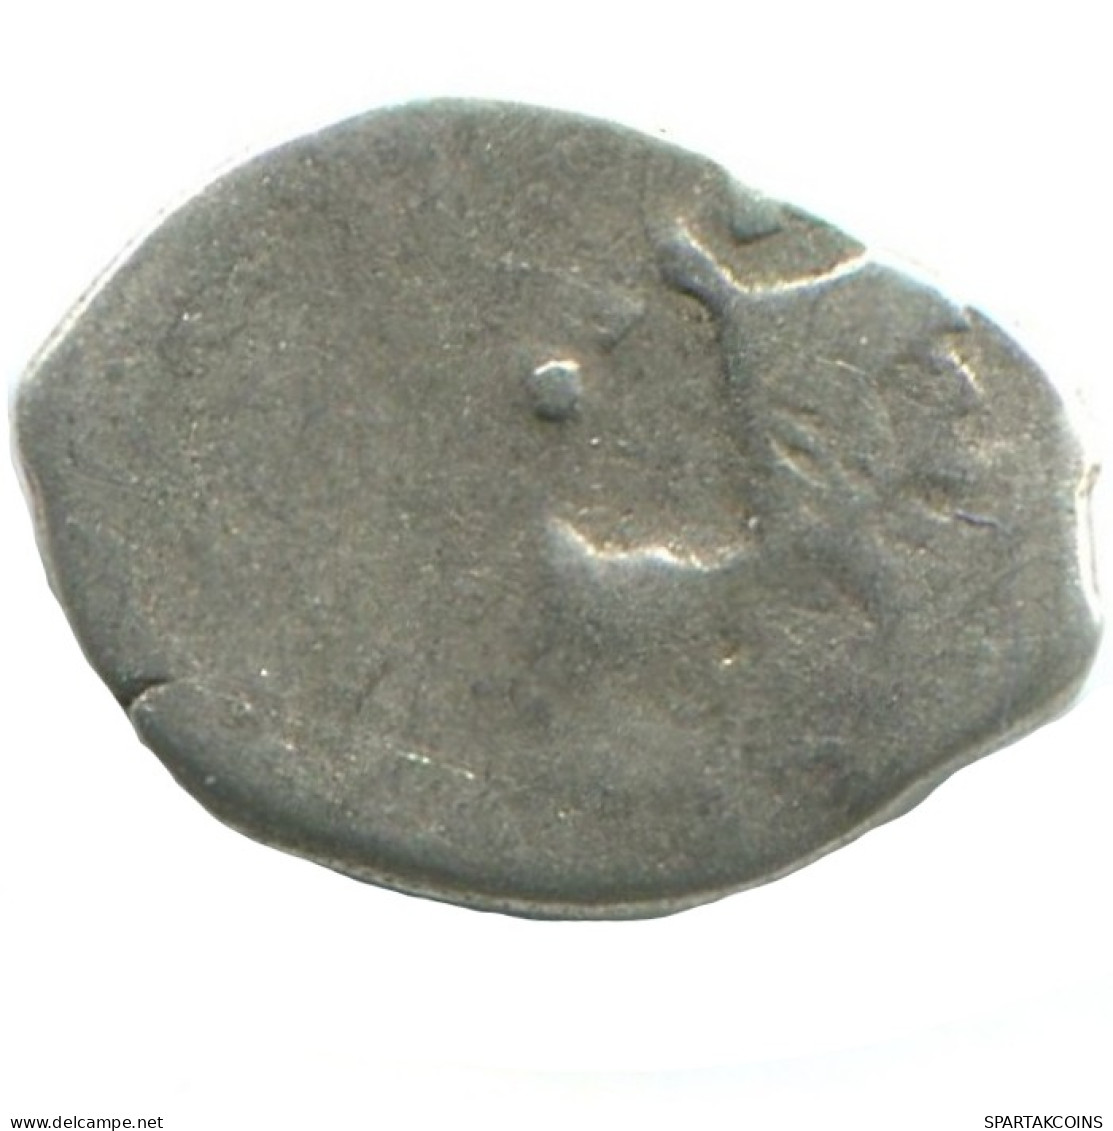 RUSIA RUSSIA 1702 KOPECK PETER I OLD Mint MOSCOW PLATA 0.3g/10mm #AB546.10.E.A - Russland